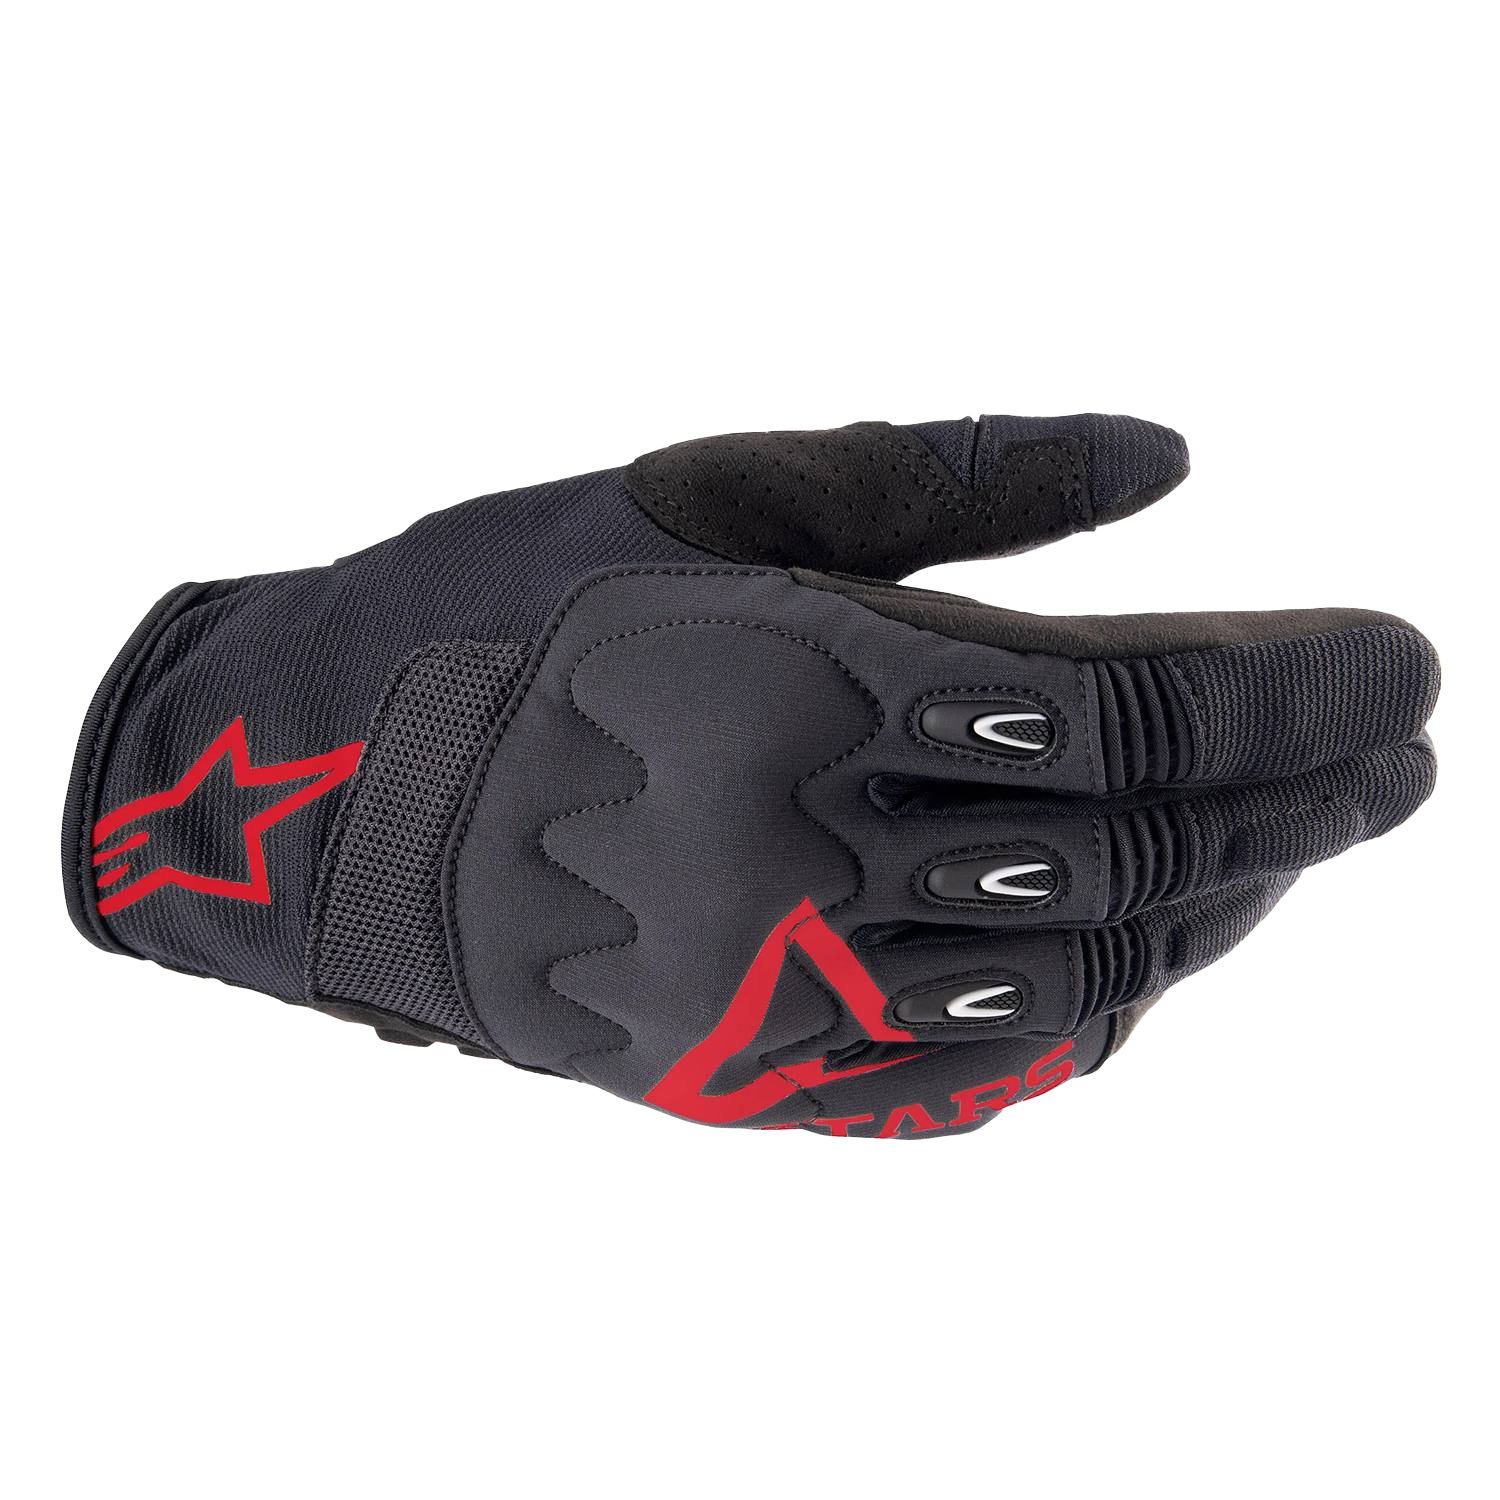 Image of Alpinestars Techdura Gloves Fire Red Black Taille S